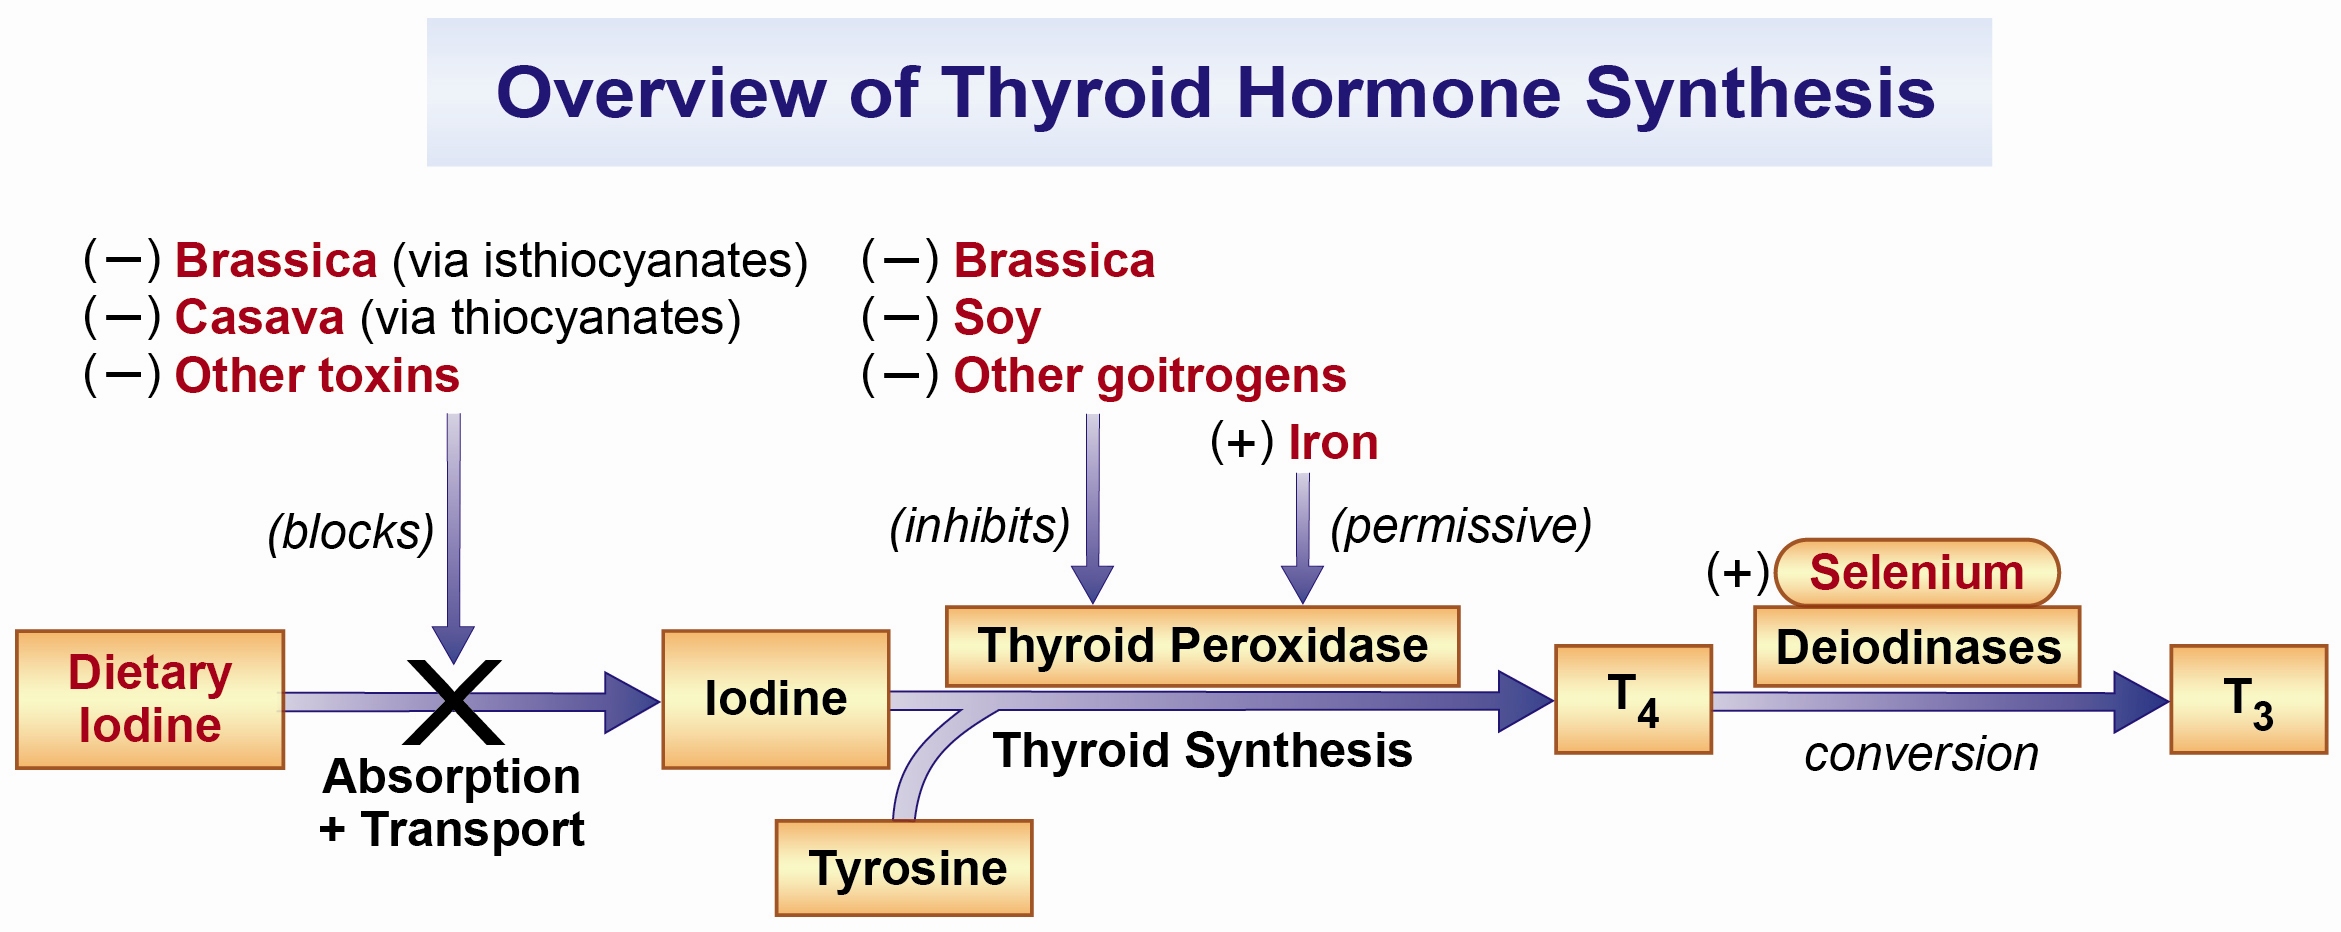 A process diagram shows how brassica, cassava, soy, goitrogens and other toxins can inhibit the production of the thyroid hormone while iron and selenium can aid in the process